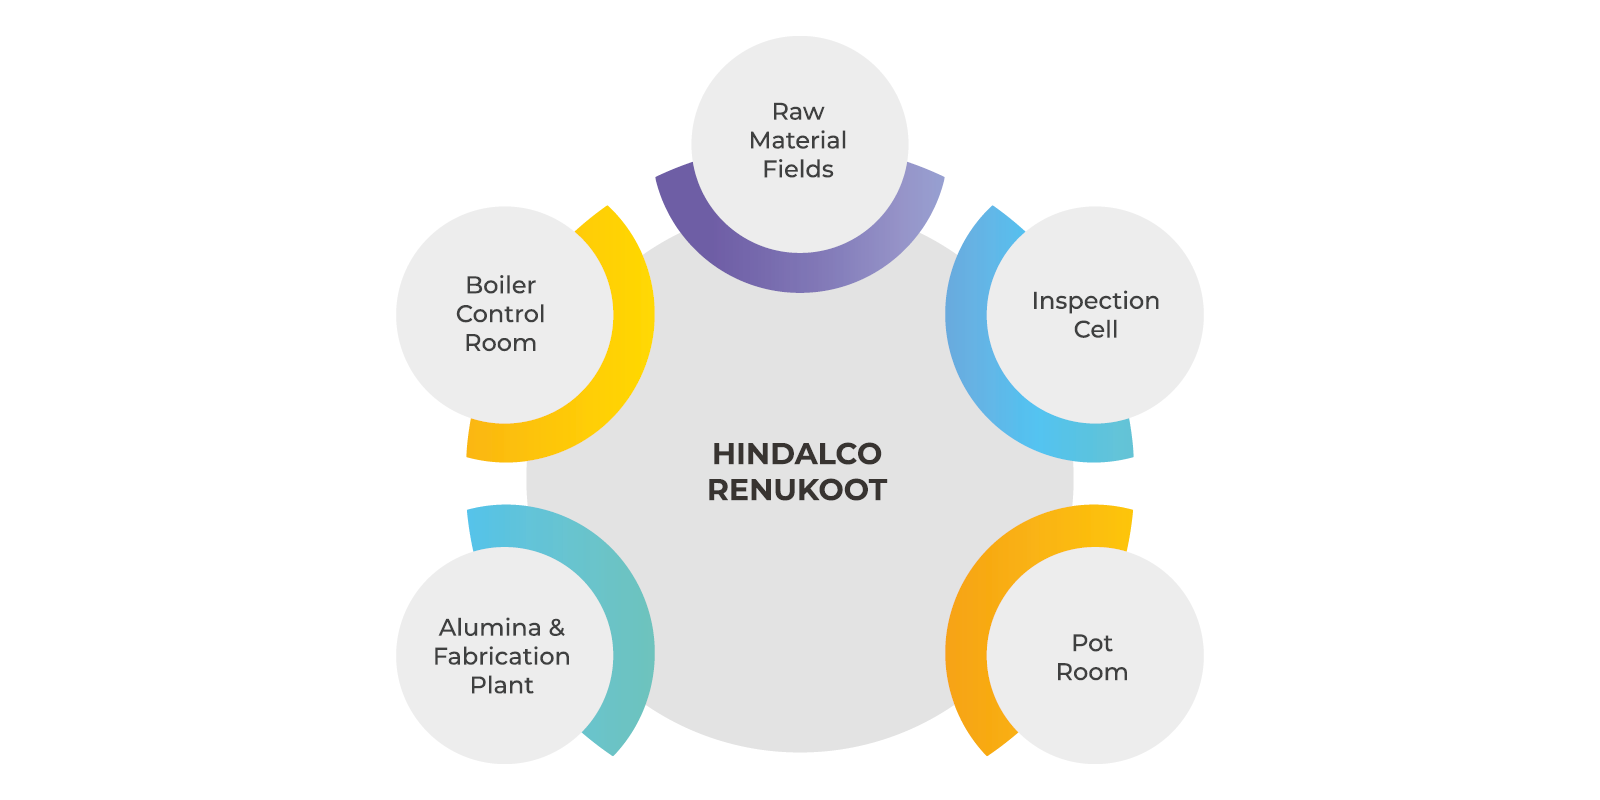 An image illustrating the list of instruments integrated with Revol LIMS (Laboratory Information Management System) in HINDALCO.